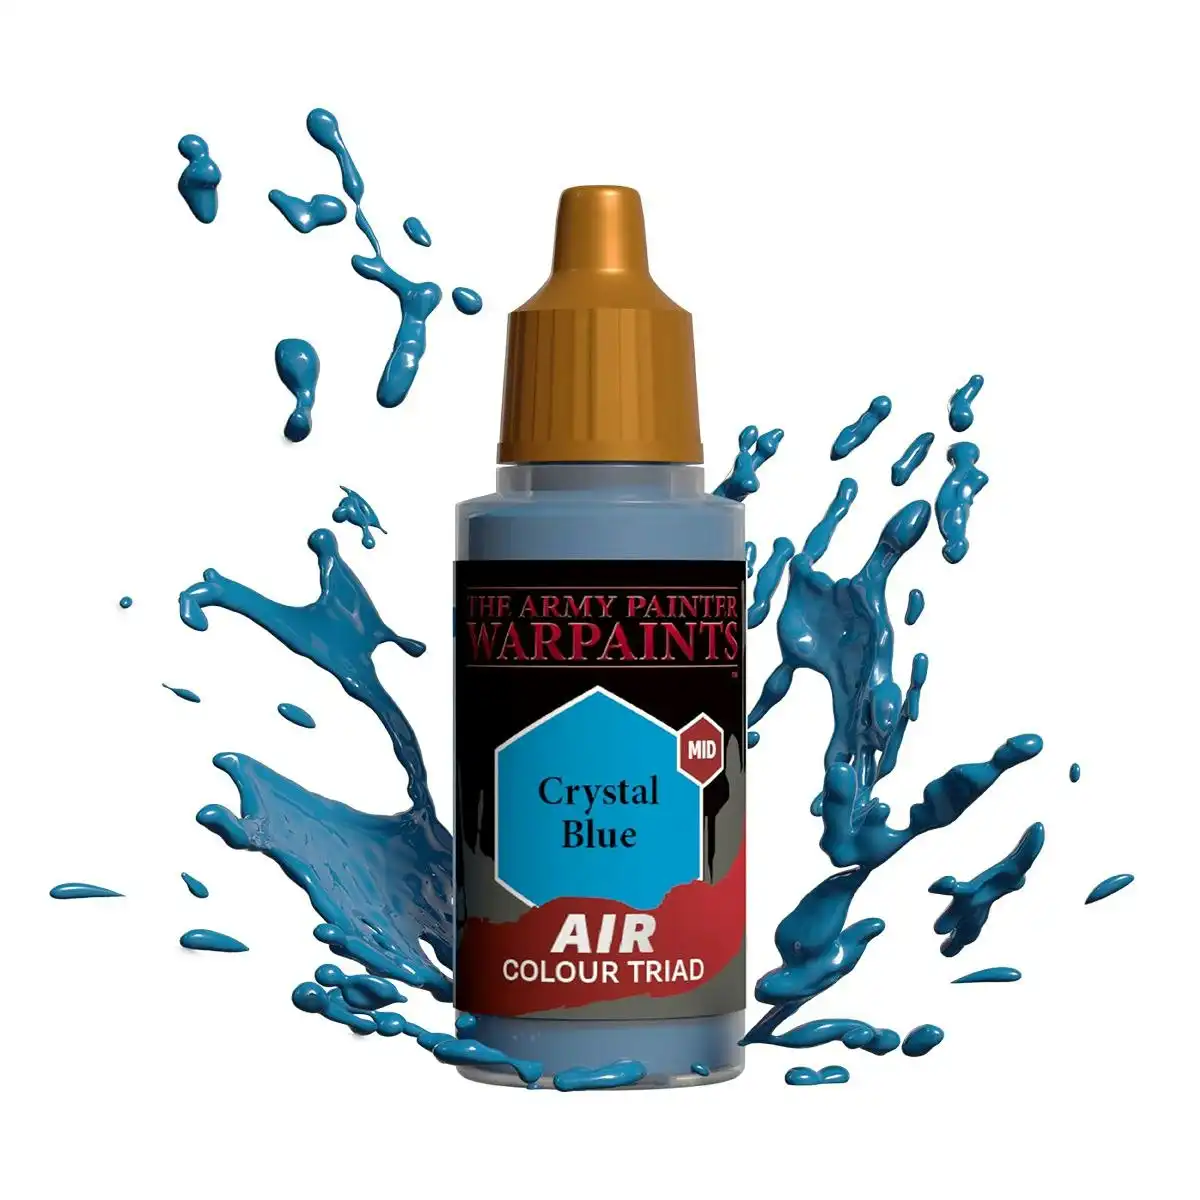 Army Painter Warpaints - Air Crystal Blue Acrylic Paint 18ml